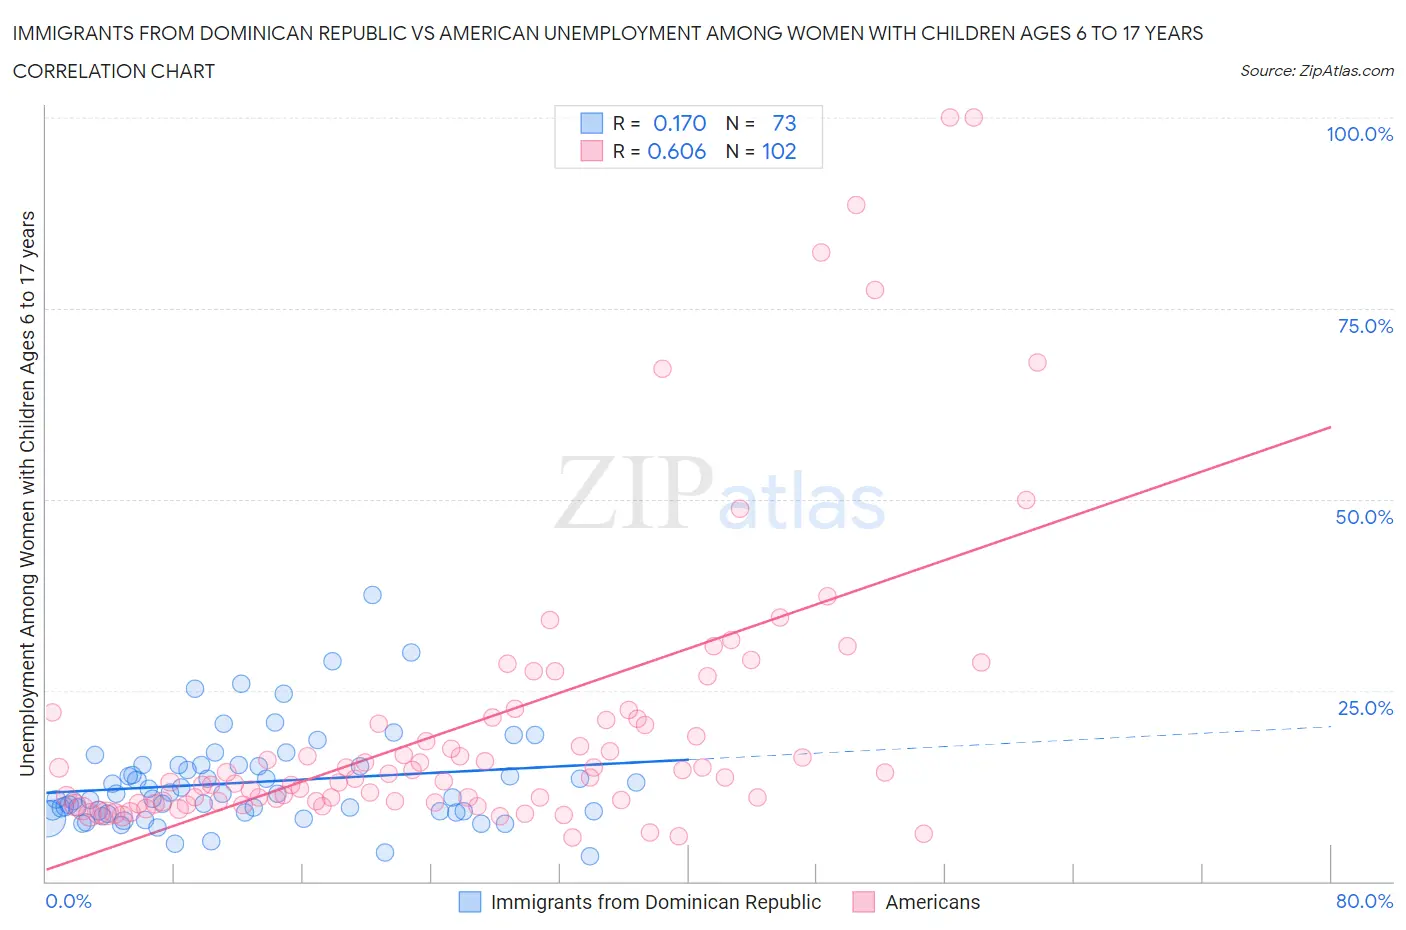 Immigrants from Dominican Republic vs American Unemployment Among Women with Children Ages 6 to 17 years